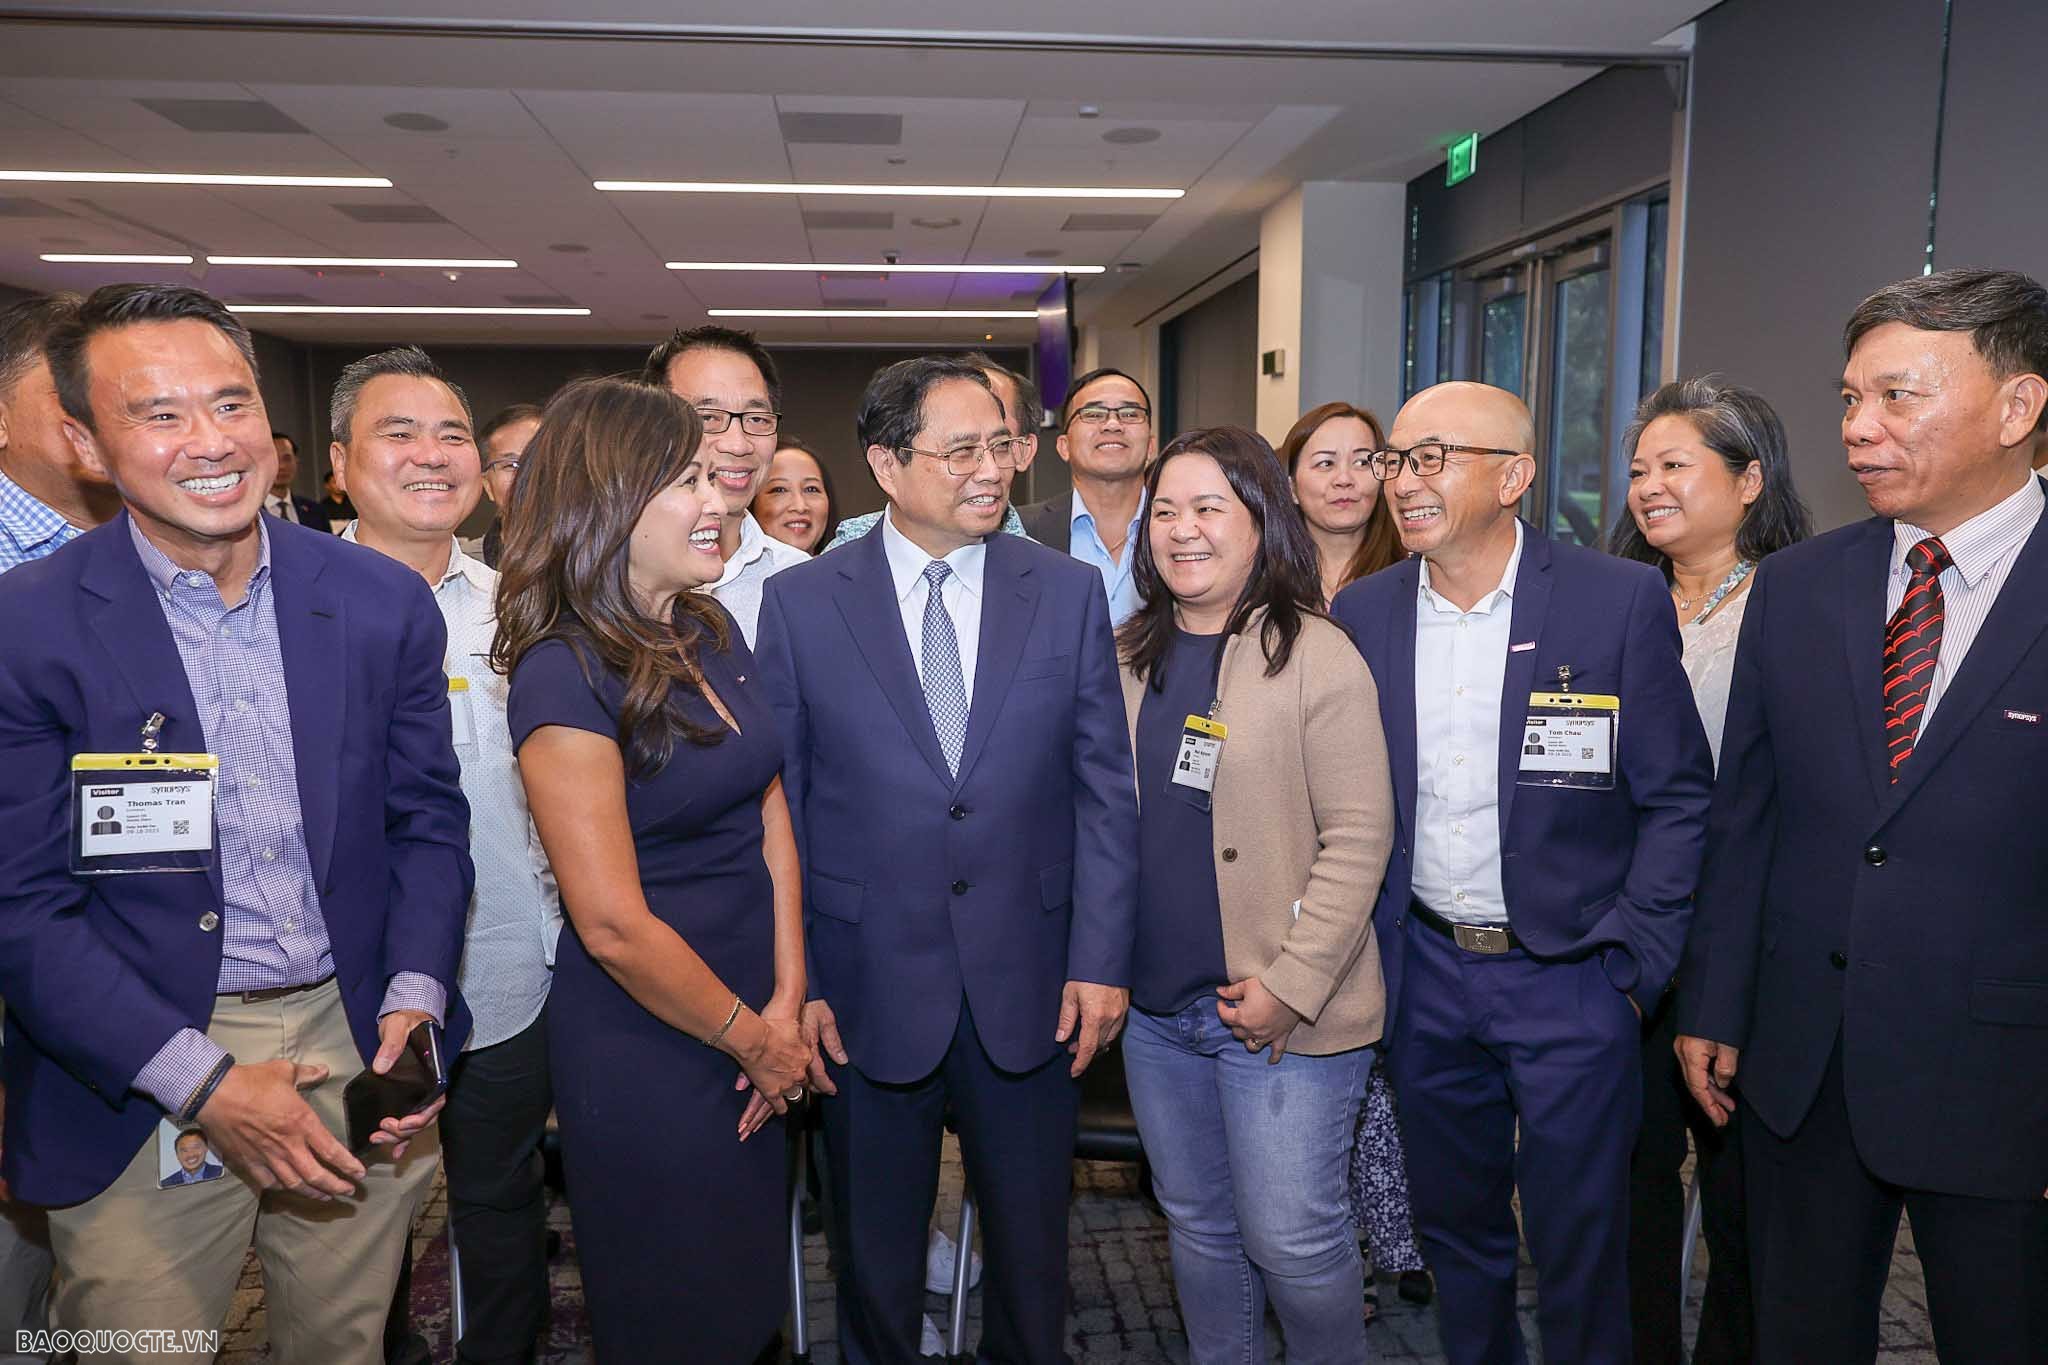 Prime Minister Pham Minh Chinh visits leading tech firms in Silicon Valley